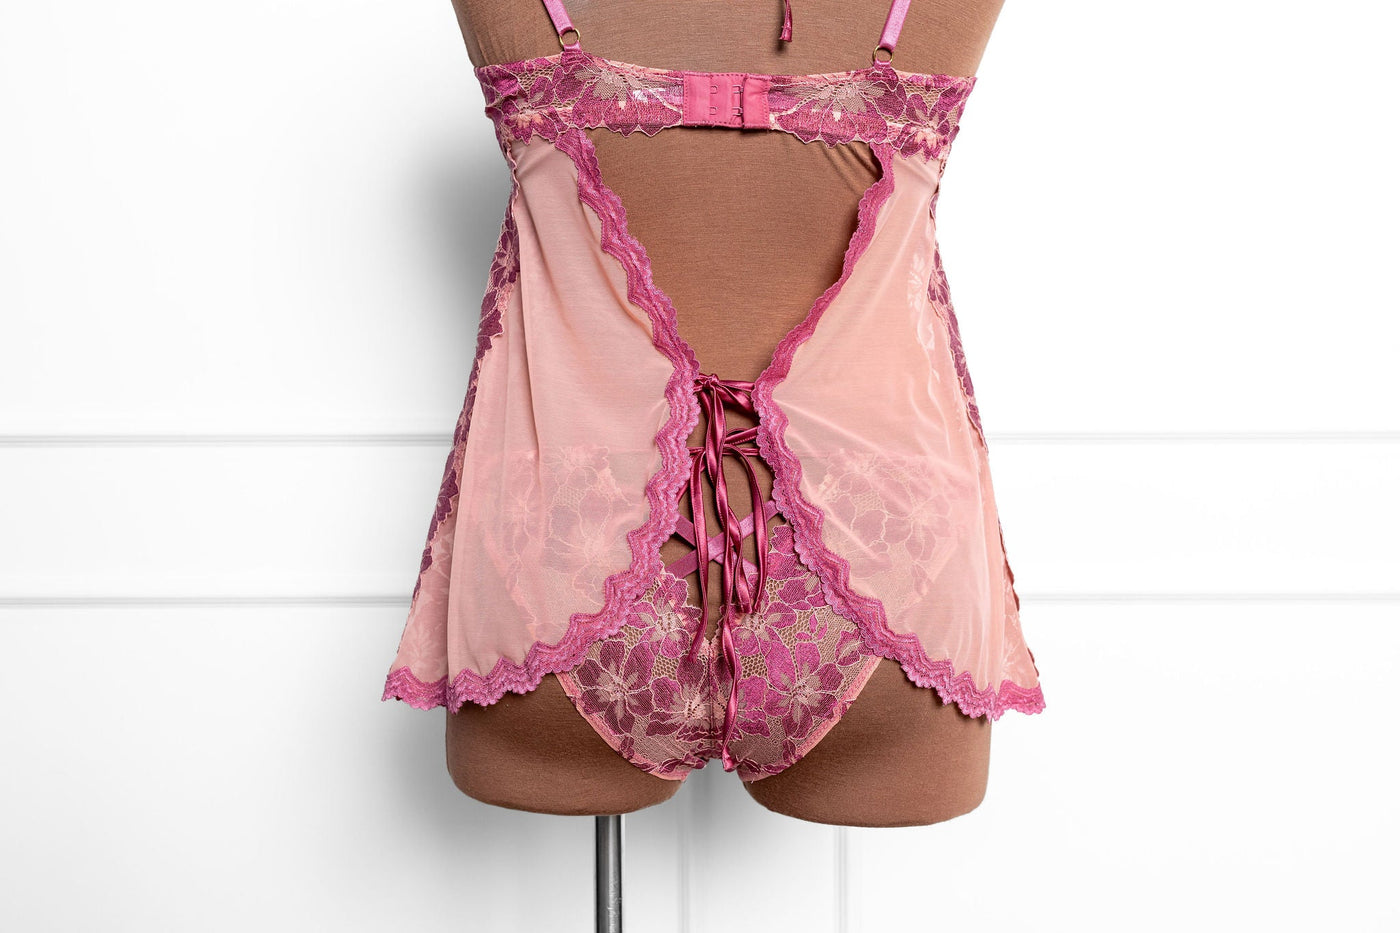 Lace & Mesh Open Back Babydoll - Raspberry - Mentionables